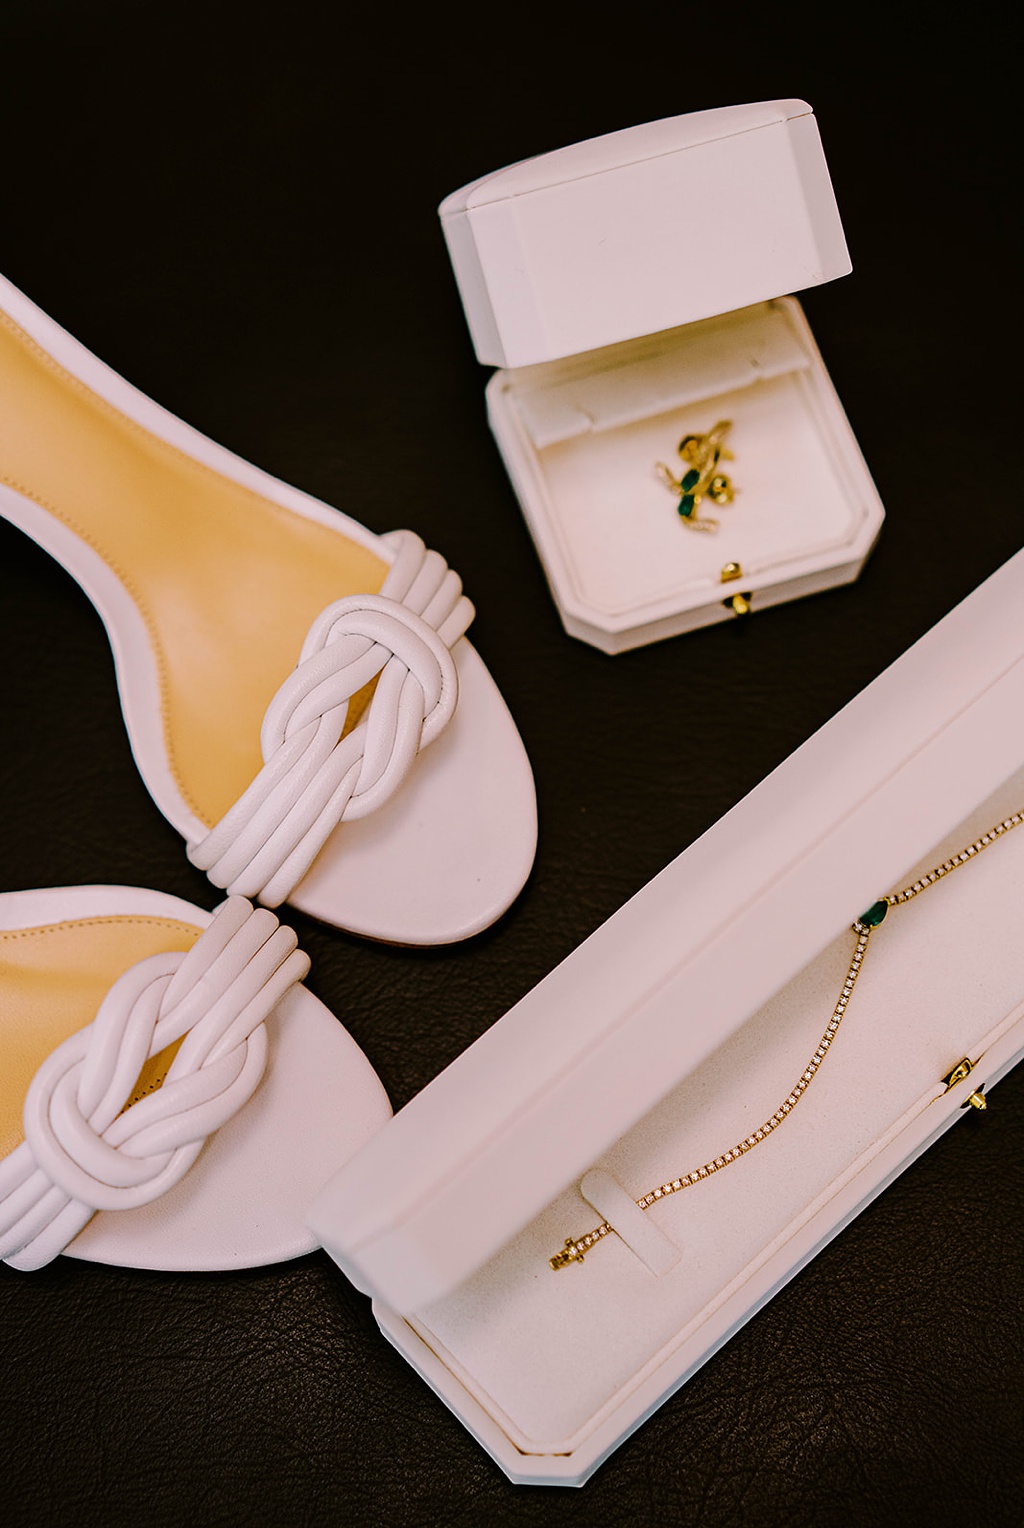 Summer wedding details including open-toed shoes and accessories